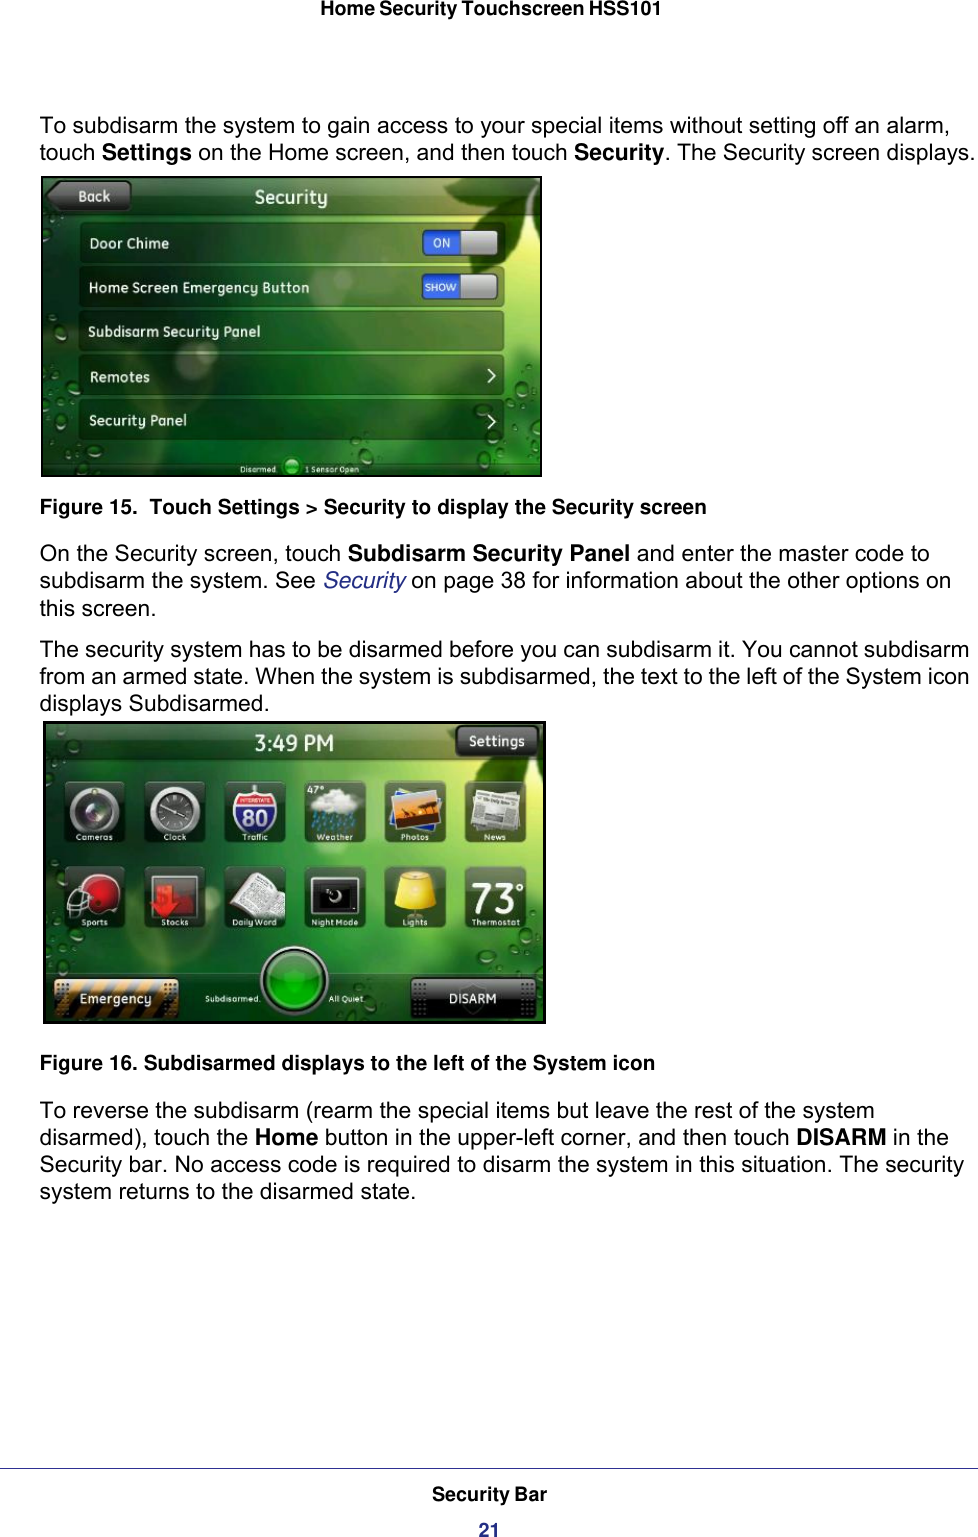 Security Bar21 Home Security Touchscreen HSS101To subdisarm the system to gain access to your special items without setting off an alarm, touch Settings on the Home screen, and then touch Security. The Security screen displays.Figure 15.  Touch Settings &gt; Security to display the Security screenOn the Security screen, touch Subdisarm Security Panel and enter the master code to subdisarm the system. See Security on page  38 for information about the other options on this screen.The security system has to be disarmed before you can subdisarm it. You cannot subdisarm from an armed state. When the system is subdisarmed, the text to the left of the System icon displays Subdisarmed. Figure 16. Subdisarmed displays to the left of the System iconTo reverse the subdisarm (rearm the special items but leave the rest of the system disarmed), touch the Home button in the upper-left corner, and then touch DISARM in the Security bar. No access code is required to disarm the system in this situation. The security system returns to the disarmed state.